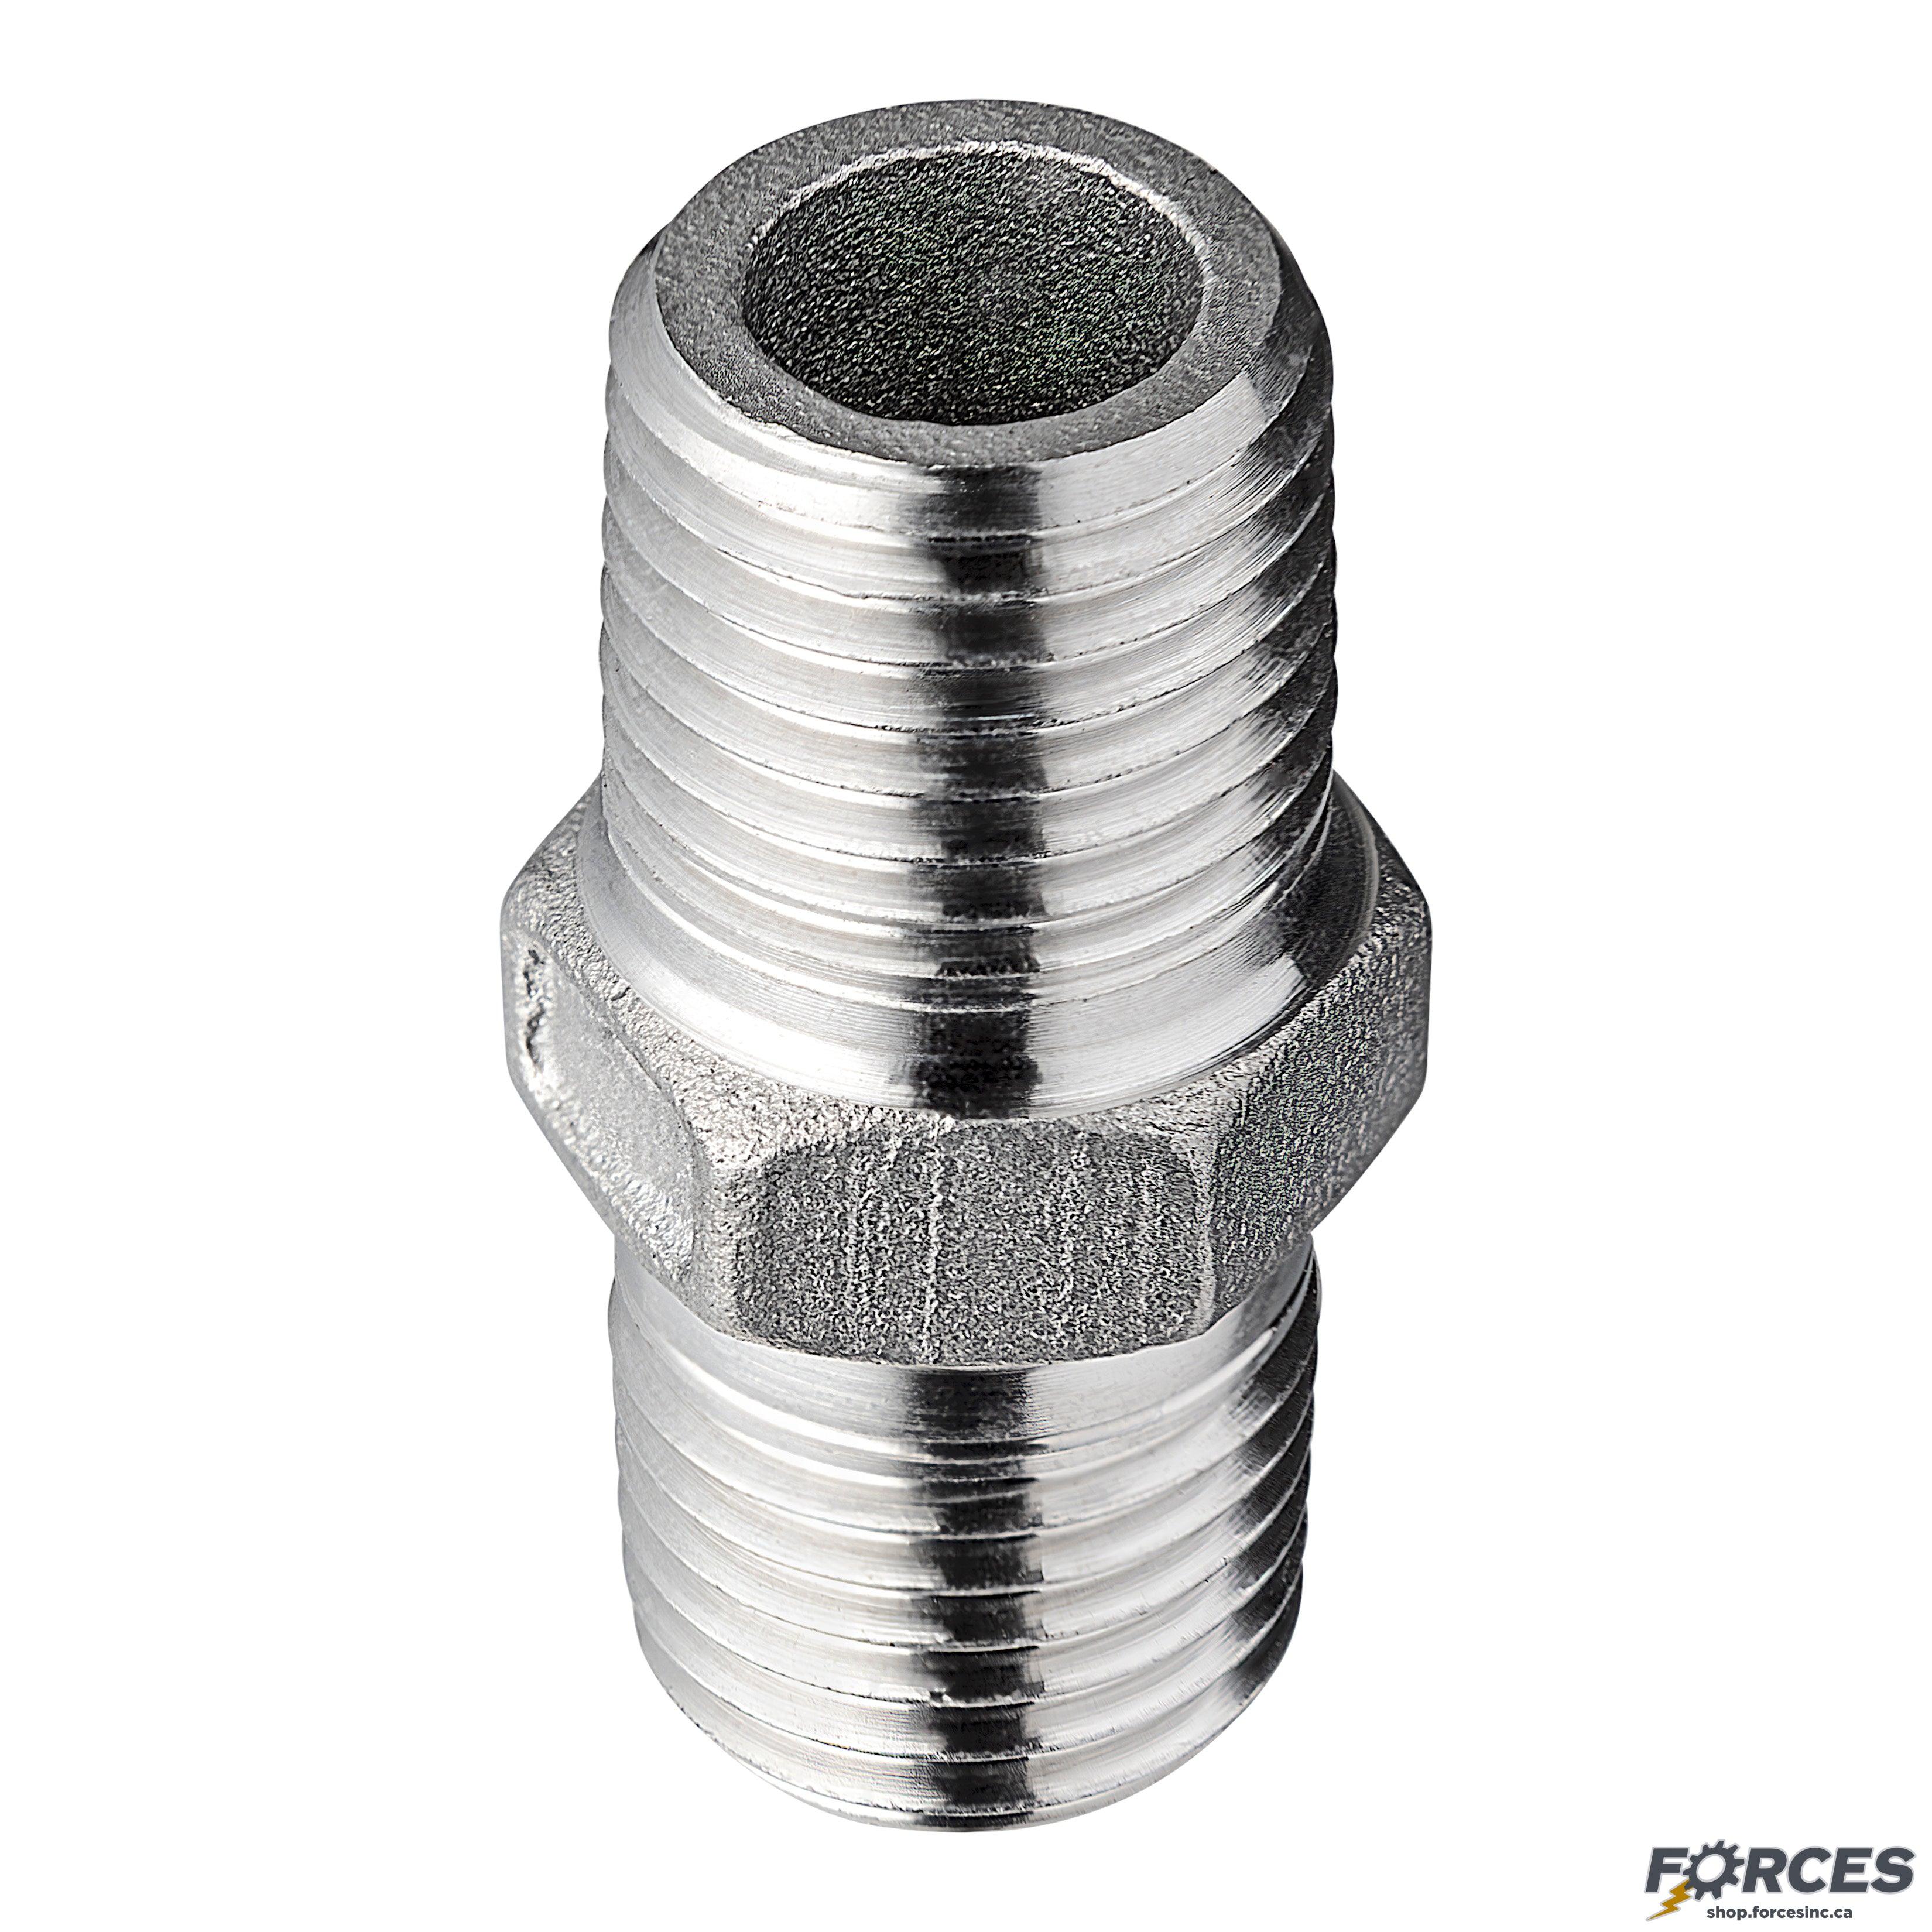 3/8" Hex Nipple NPT #150 - Stainless Steel 316 - Forces Inc